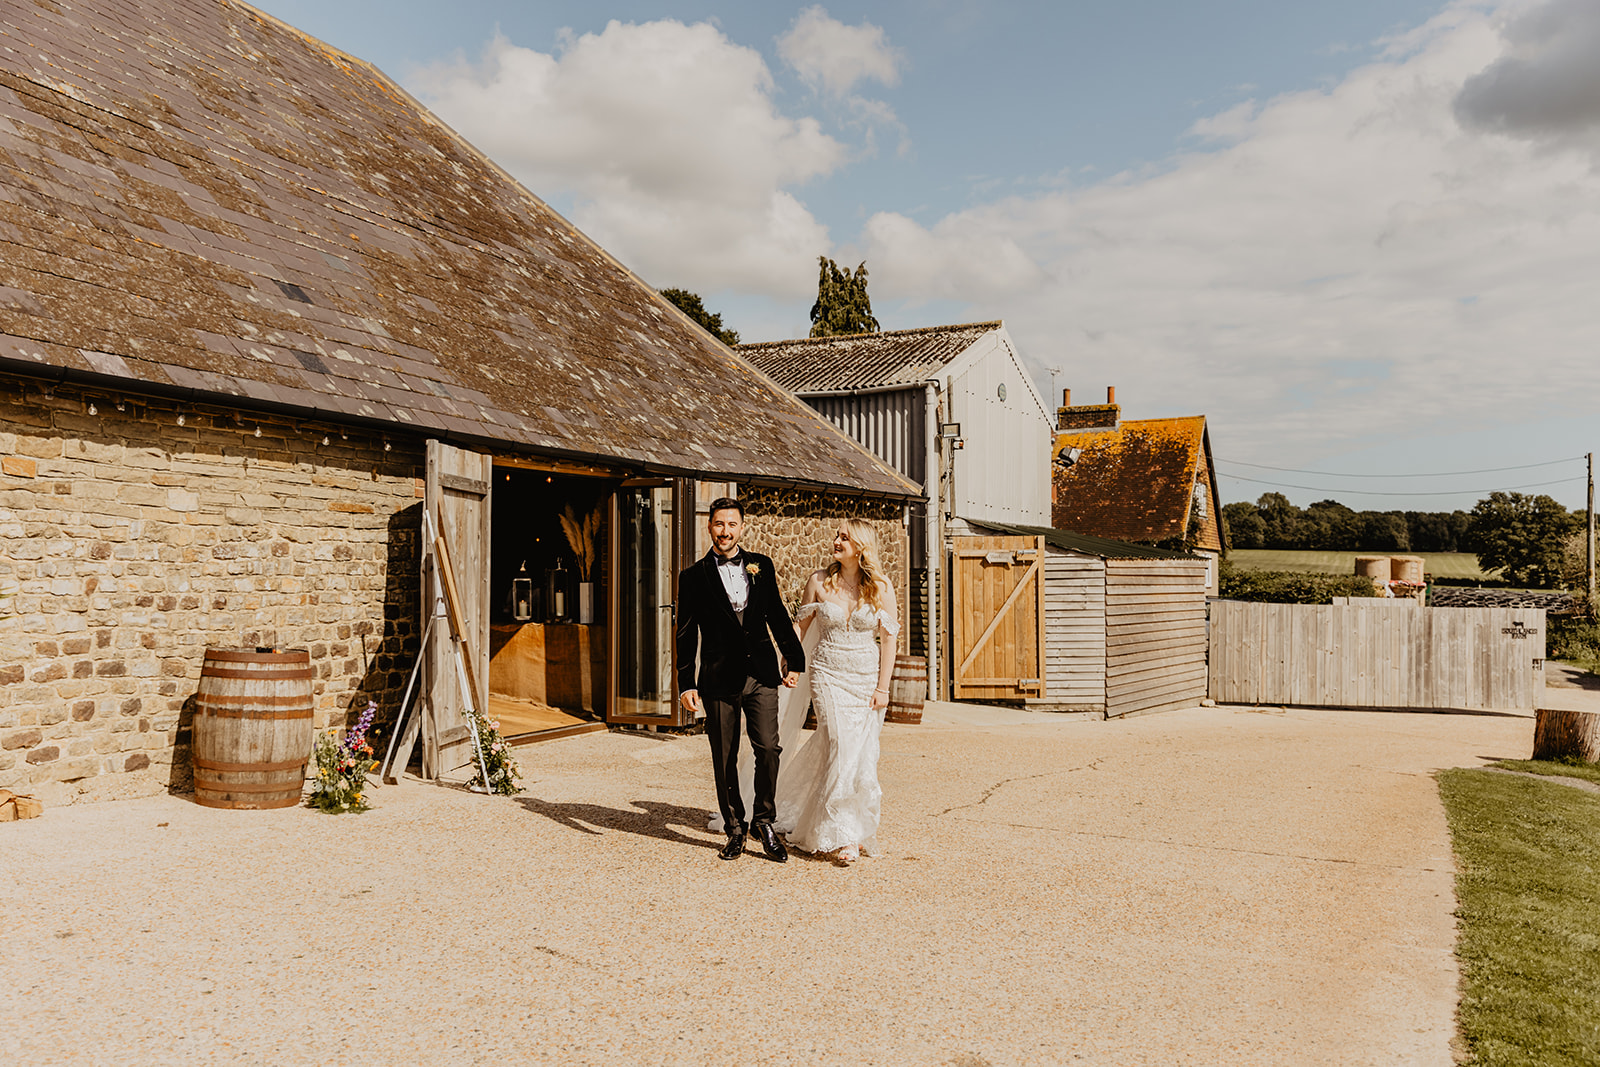 Bride and groom at a Southlands barn wedding, Sussex. Photo by OliveJoy Photography.